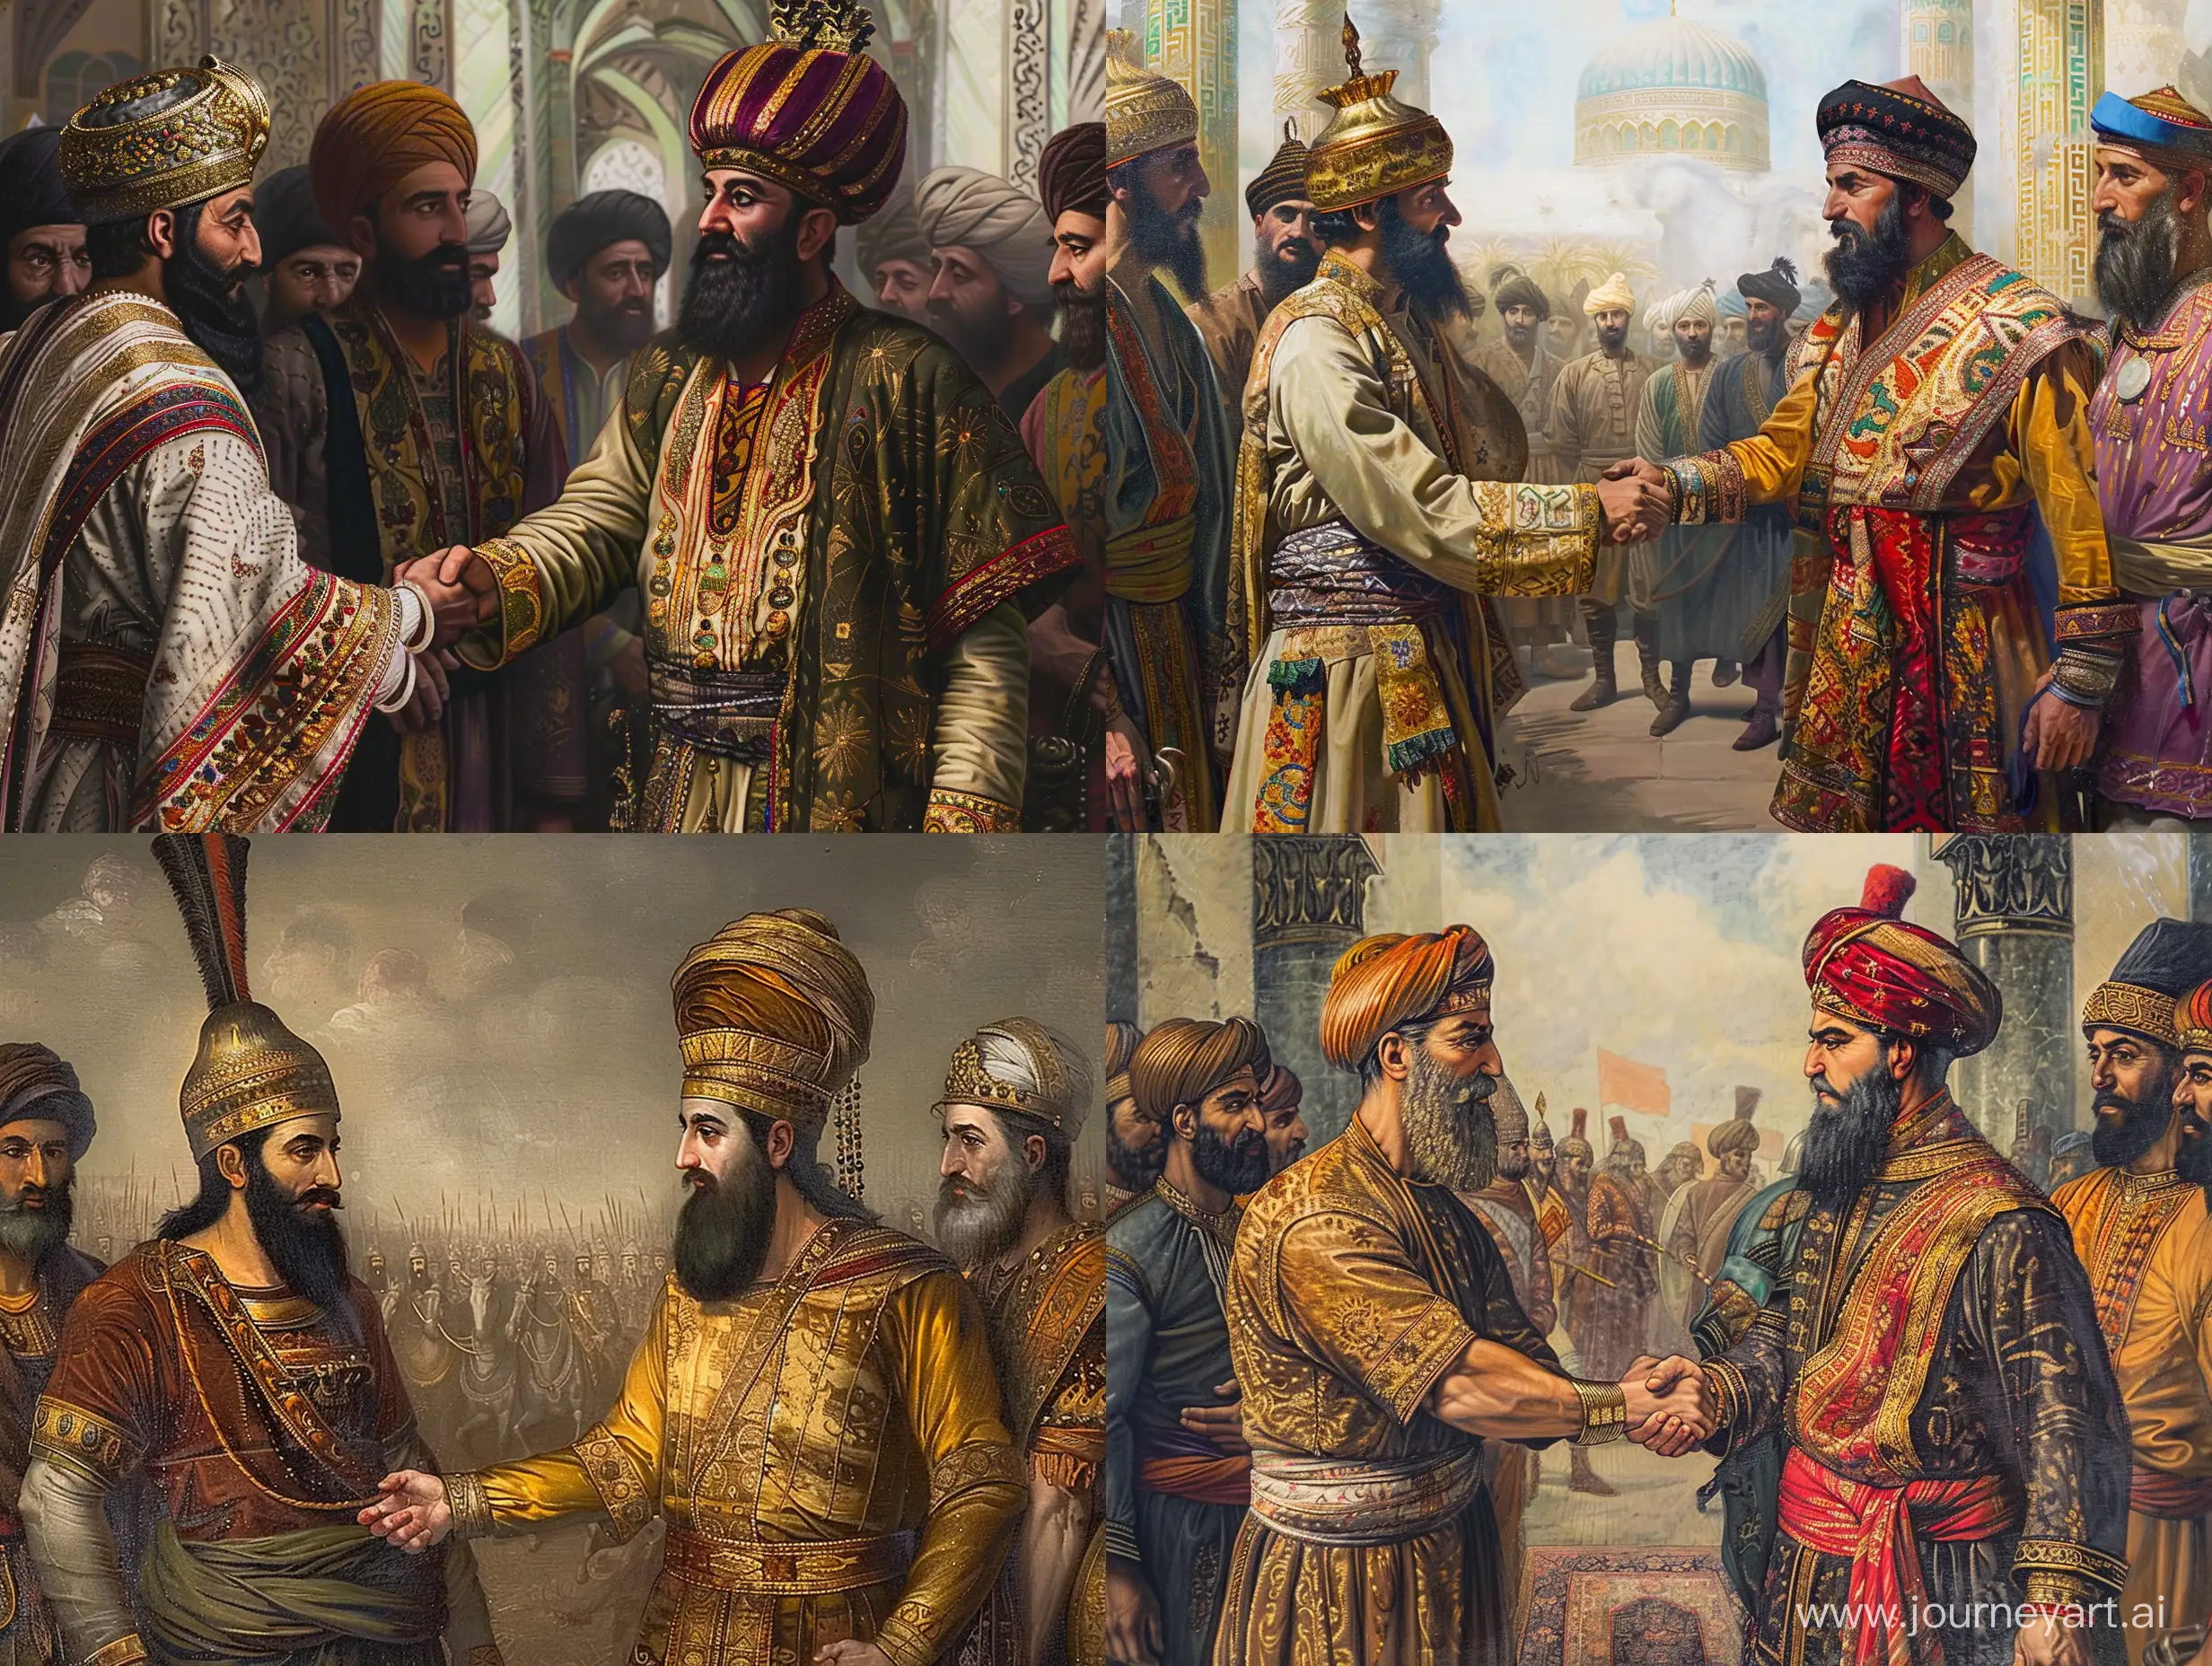  Cyrus the Great shaking hands with Nader Shah Afshar, q2